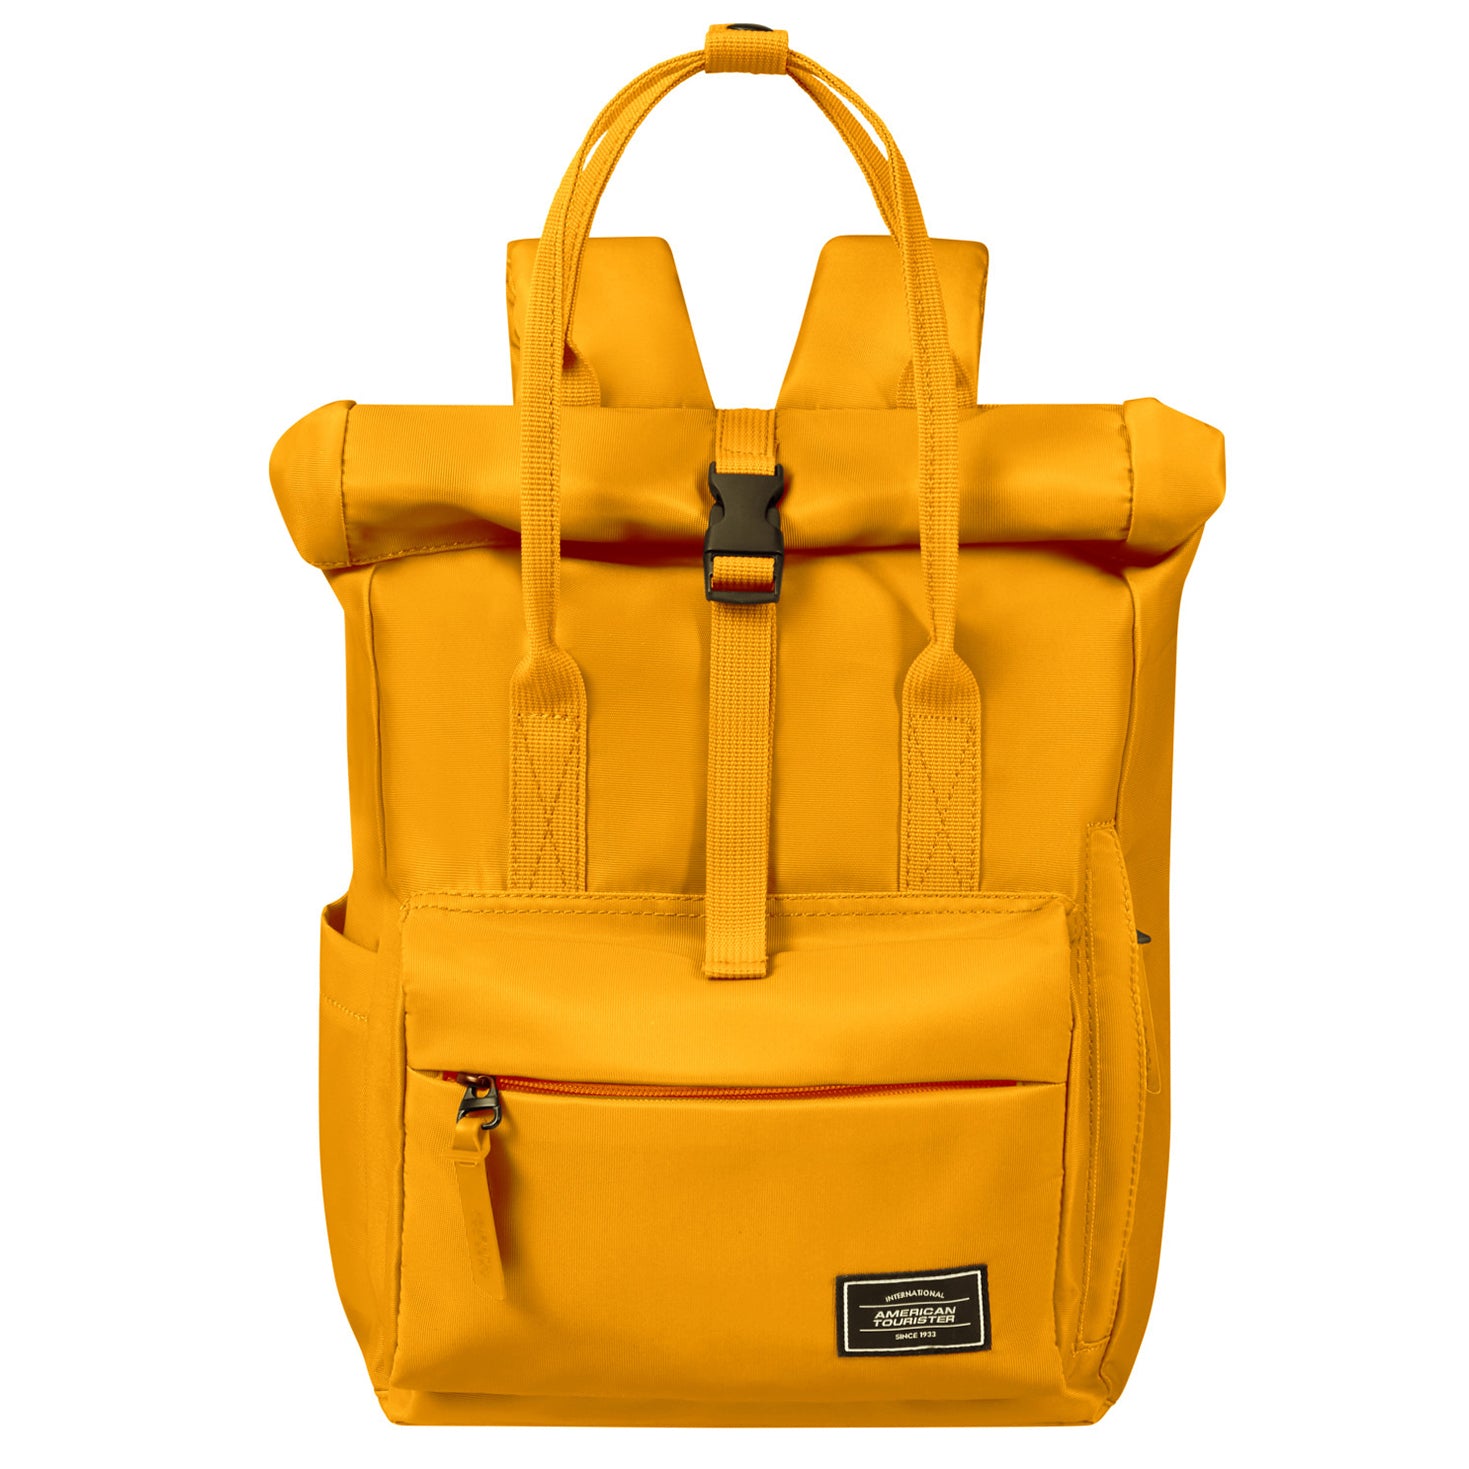 American Tourister Urban Groove City Backpack 36 cm - Yellow